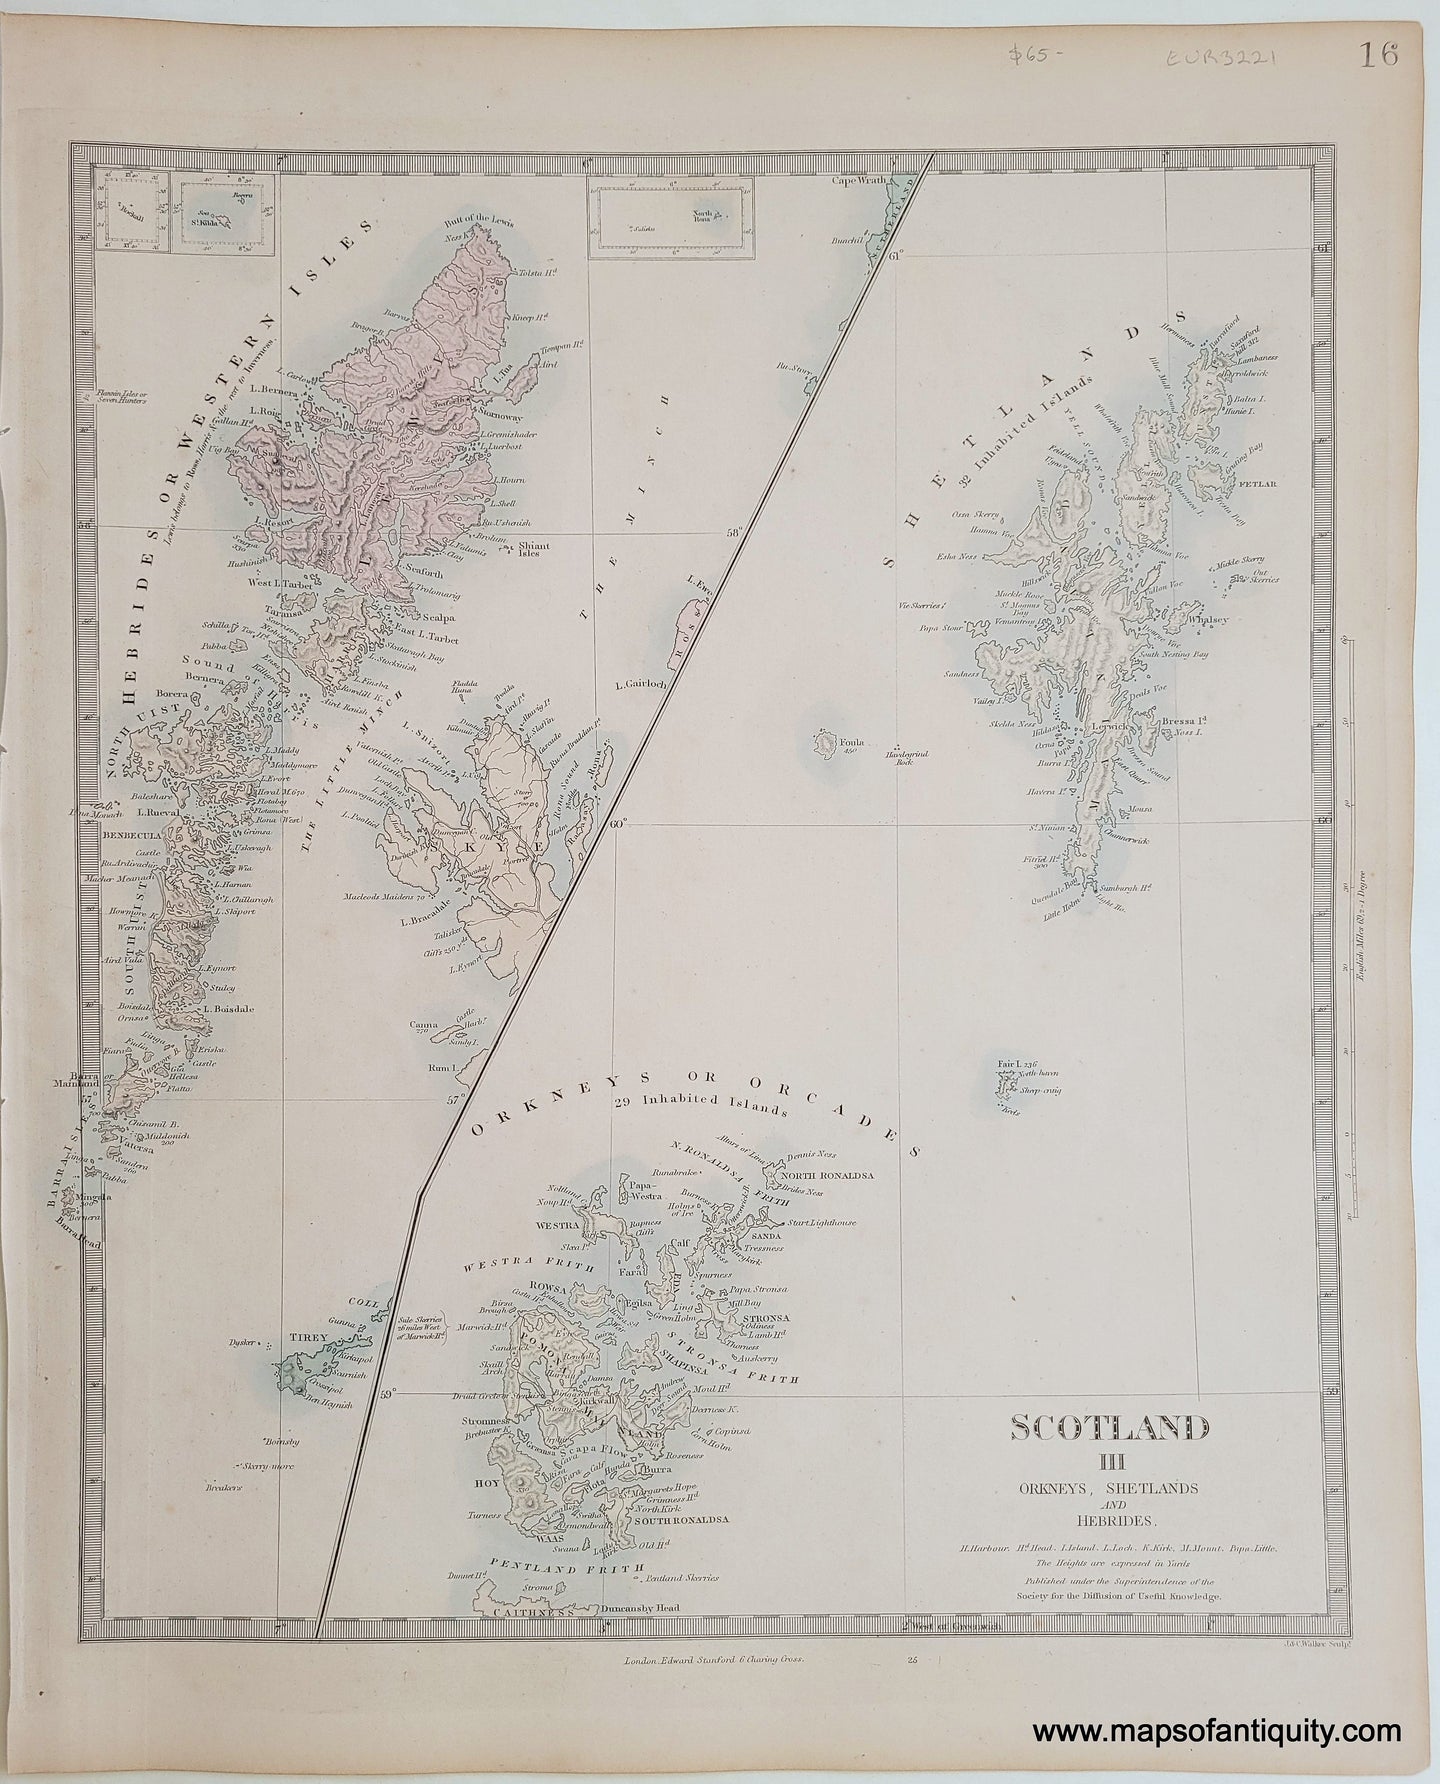 Genuine-Antique-Map-Scotland-III-Orkneys-Shetlands-and-Hebrides-Scotland--1860-SDUK-Society-for-the-Diffusion-of-Useful-Knowledge-Maps-Of-Antiquity-1800s-19th-century